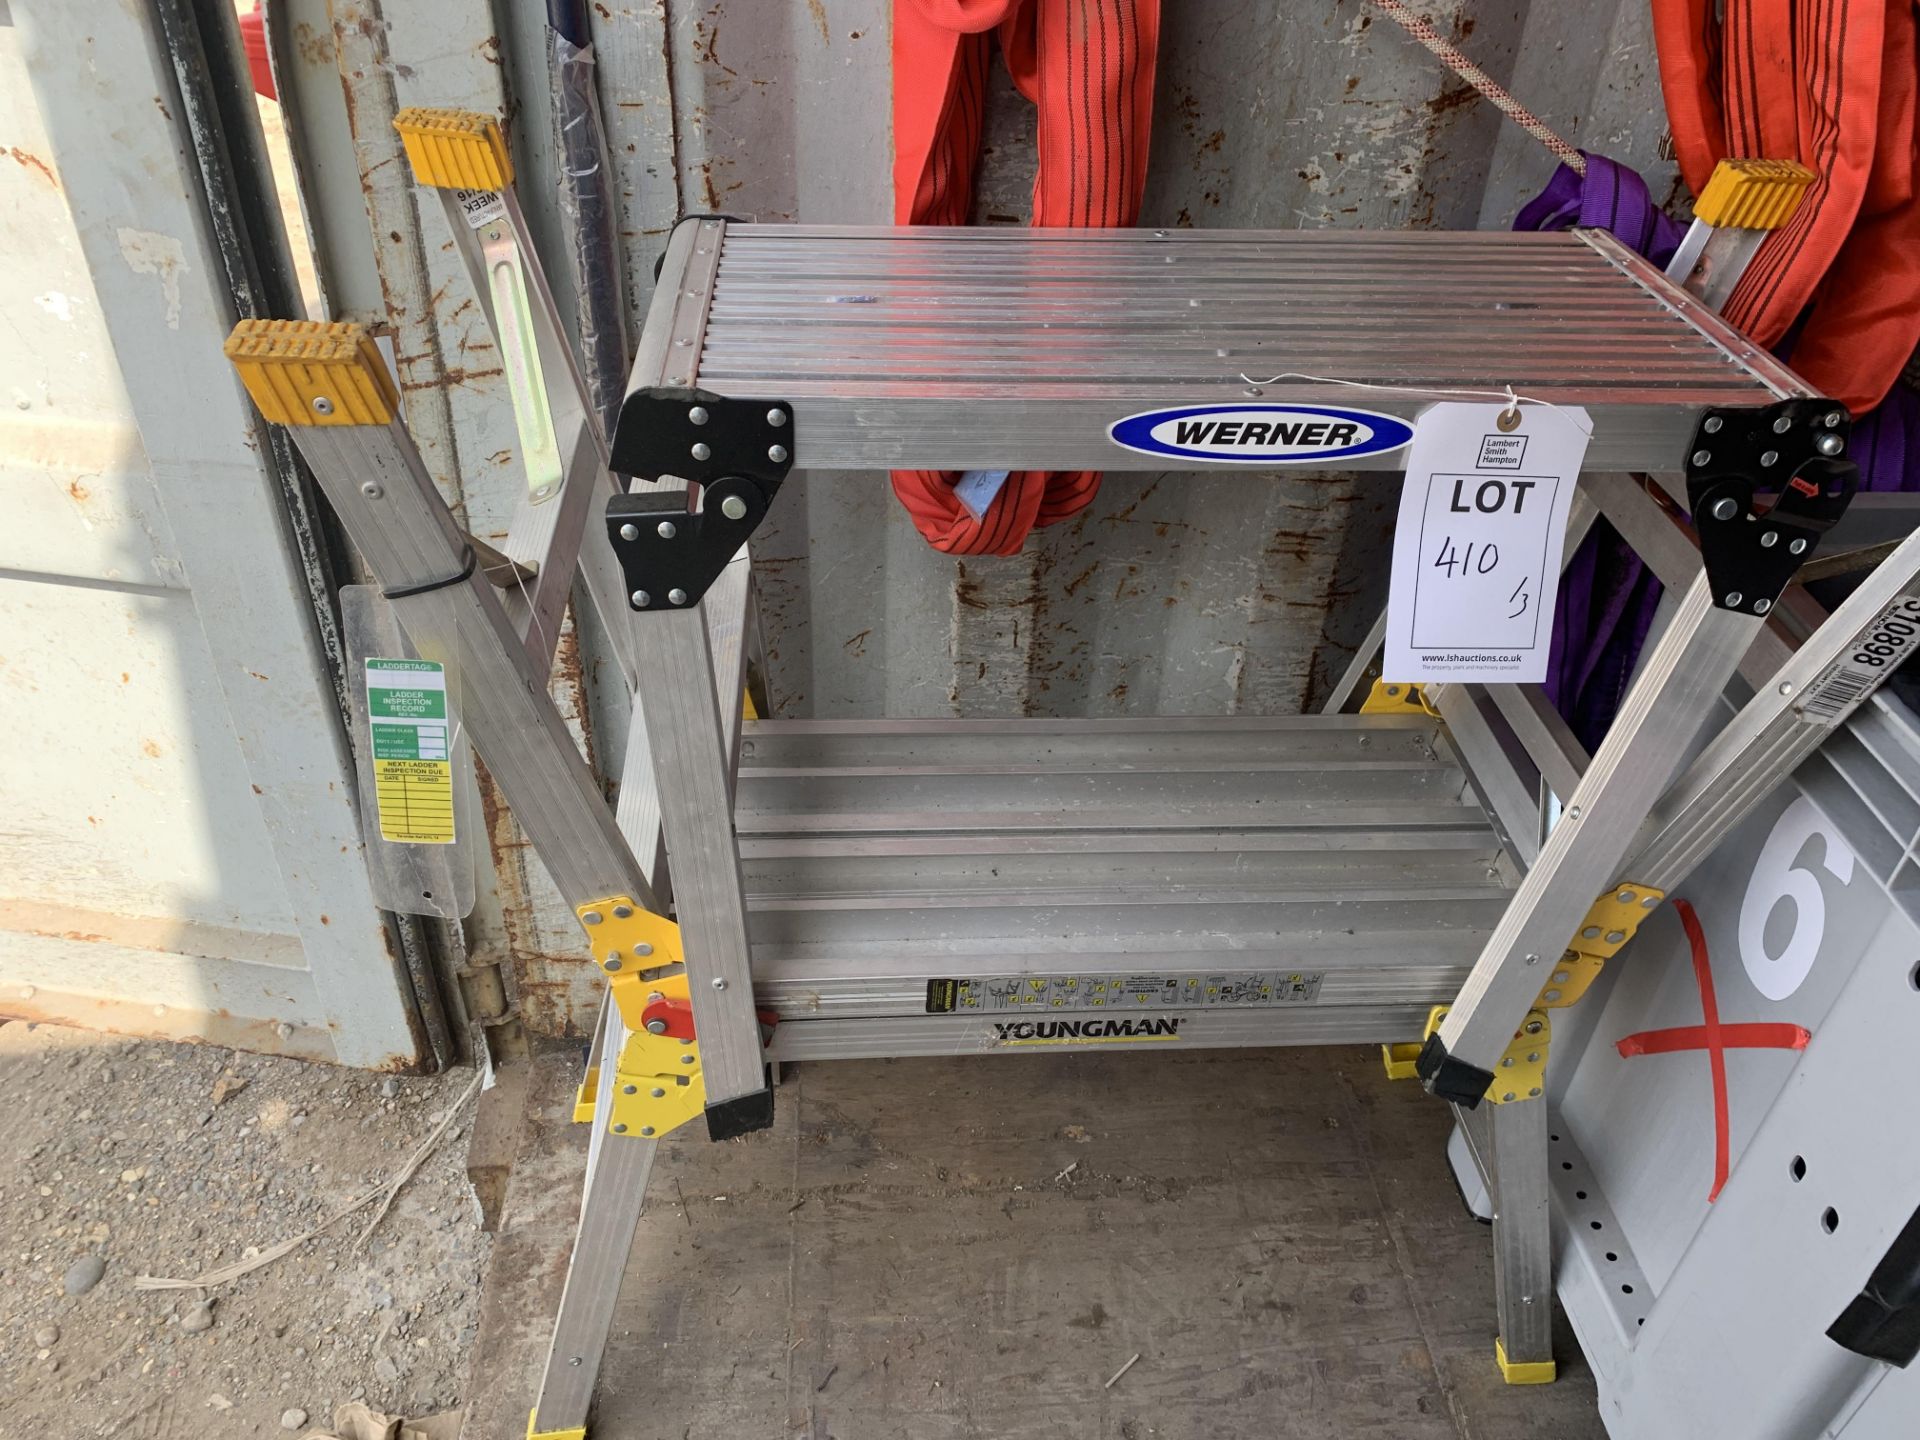 3 x Aluminium fold away work platforms 50cm height (2x Youngmans, 1x Werner) *This lot is located at